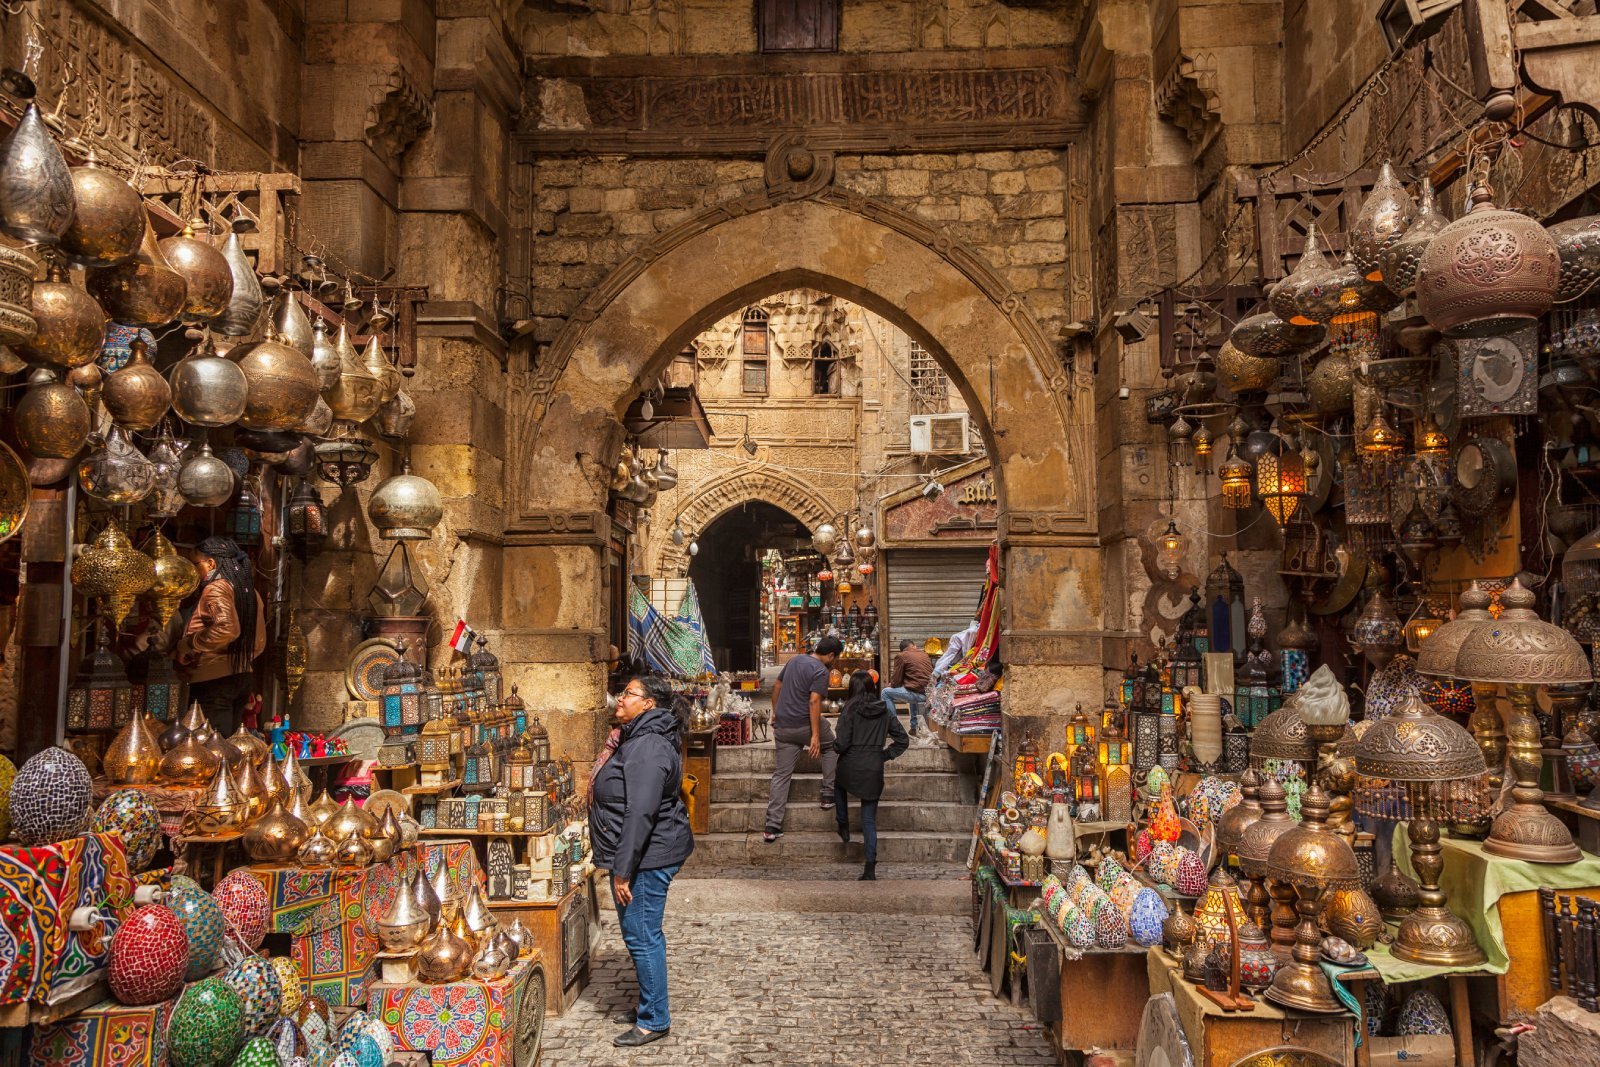 <p class="wp-caption-text">Image Credit: Shutterstock / Merydolla</p>  <p><span>Navigating the maze of souvenir shops that cluster around major tourist landmarks requires a discerning eye. These establishments often capitalize on their prime locations to sell items at inflated prices, exploiting convenience. While seemingly unique, the merchandise often lacks authenticity, having been mass-produced far from the locale it purports to represent.</span></p>